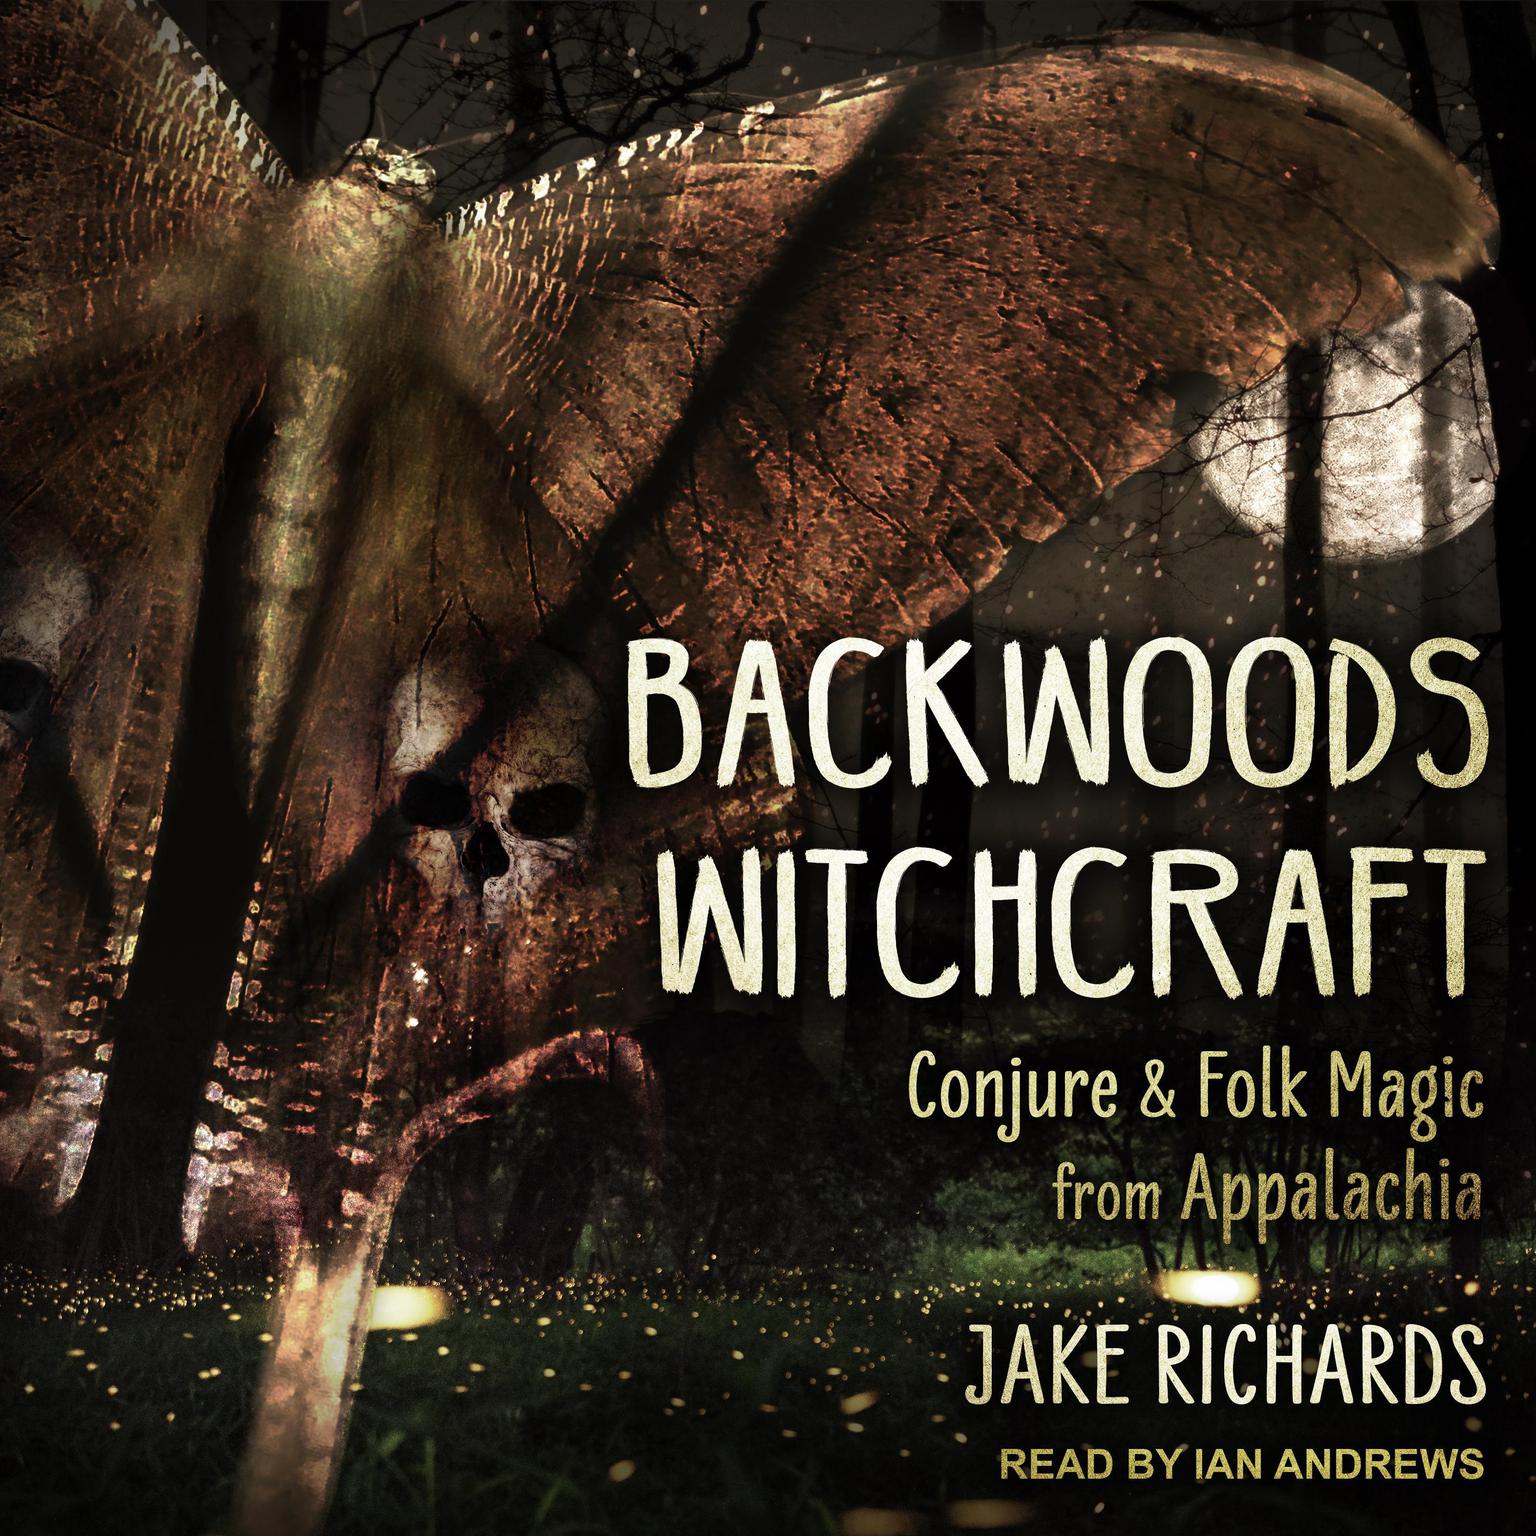 Backwoods Witchcraft: Conjure & Folk Magic from Appalachia Audiobook, by Jake Richards